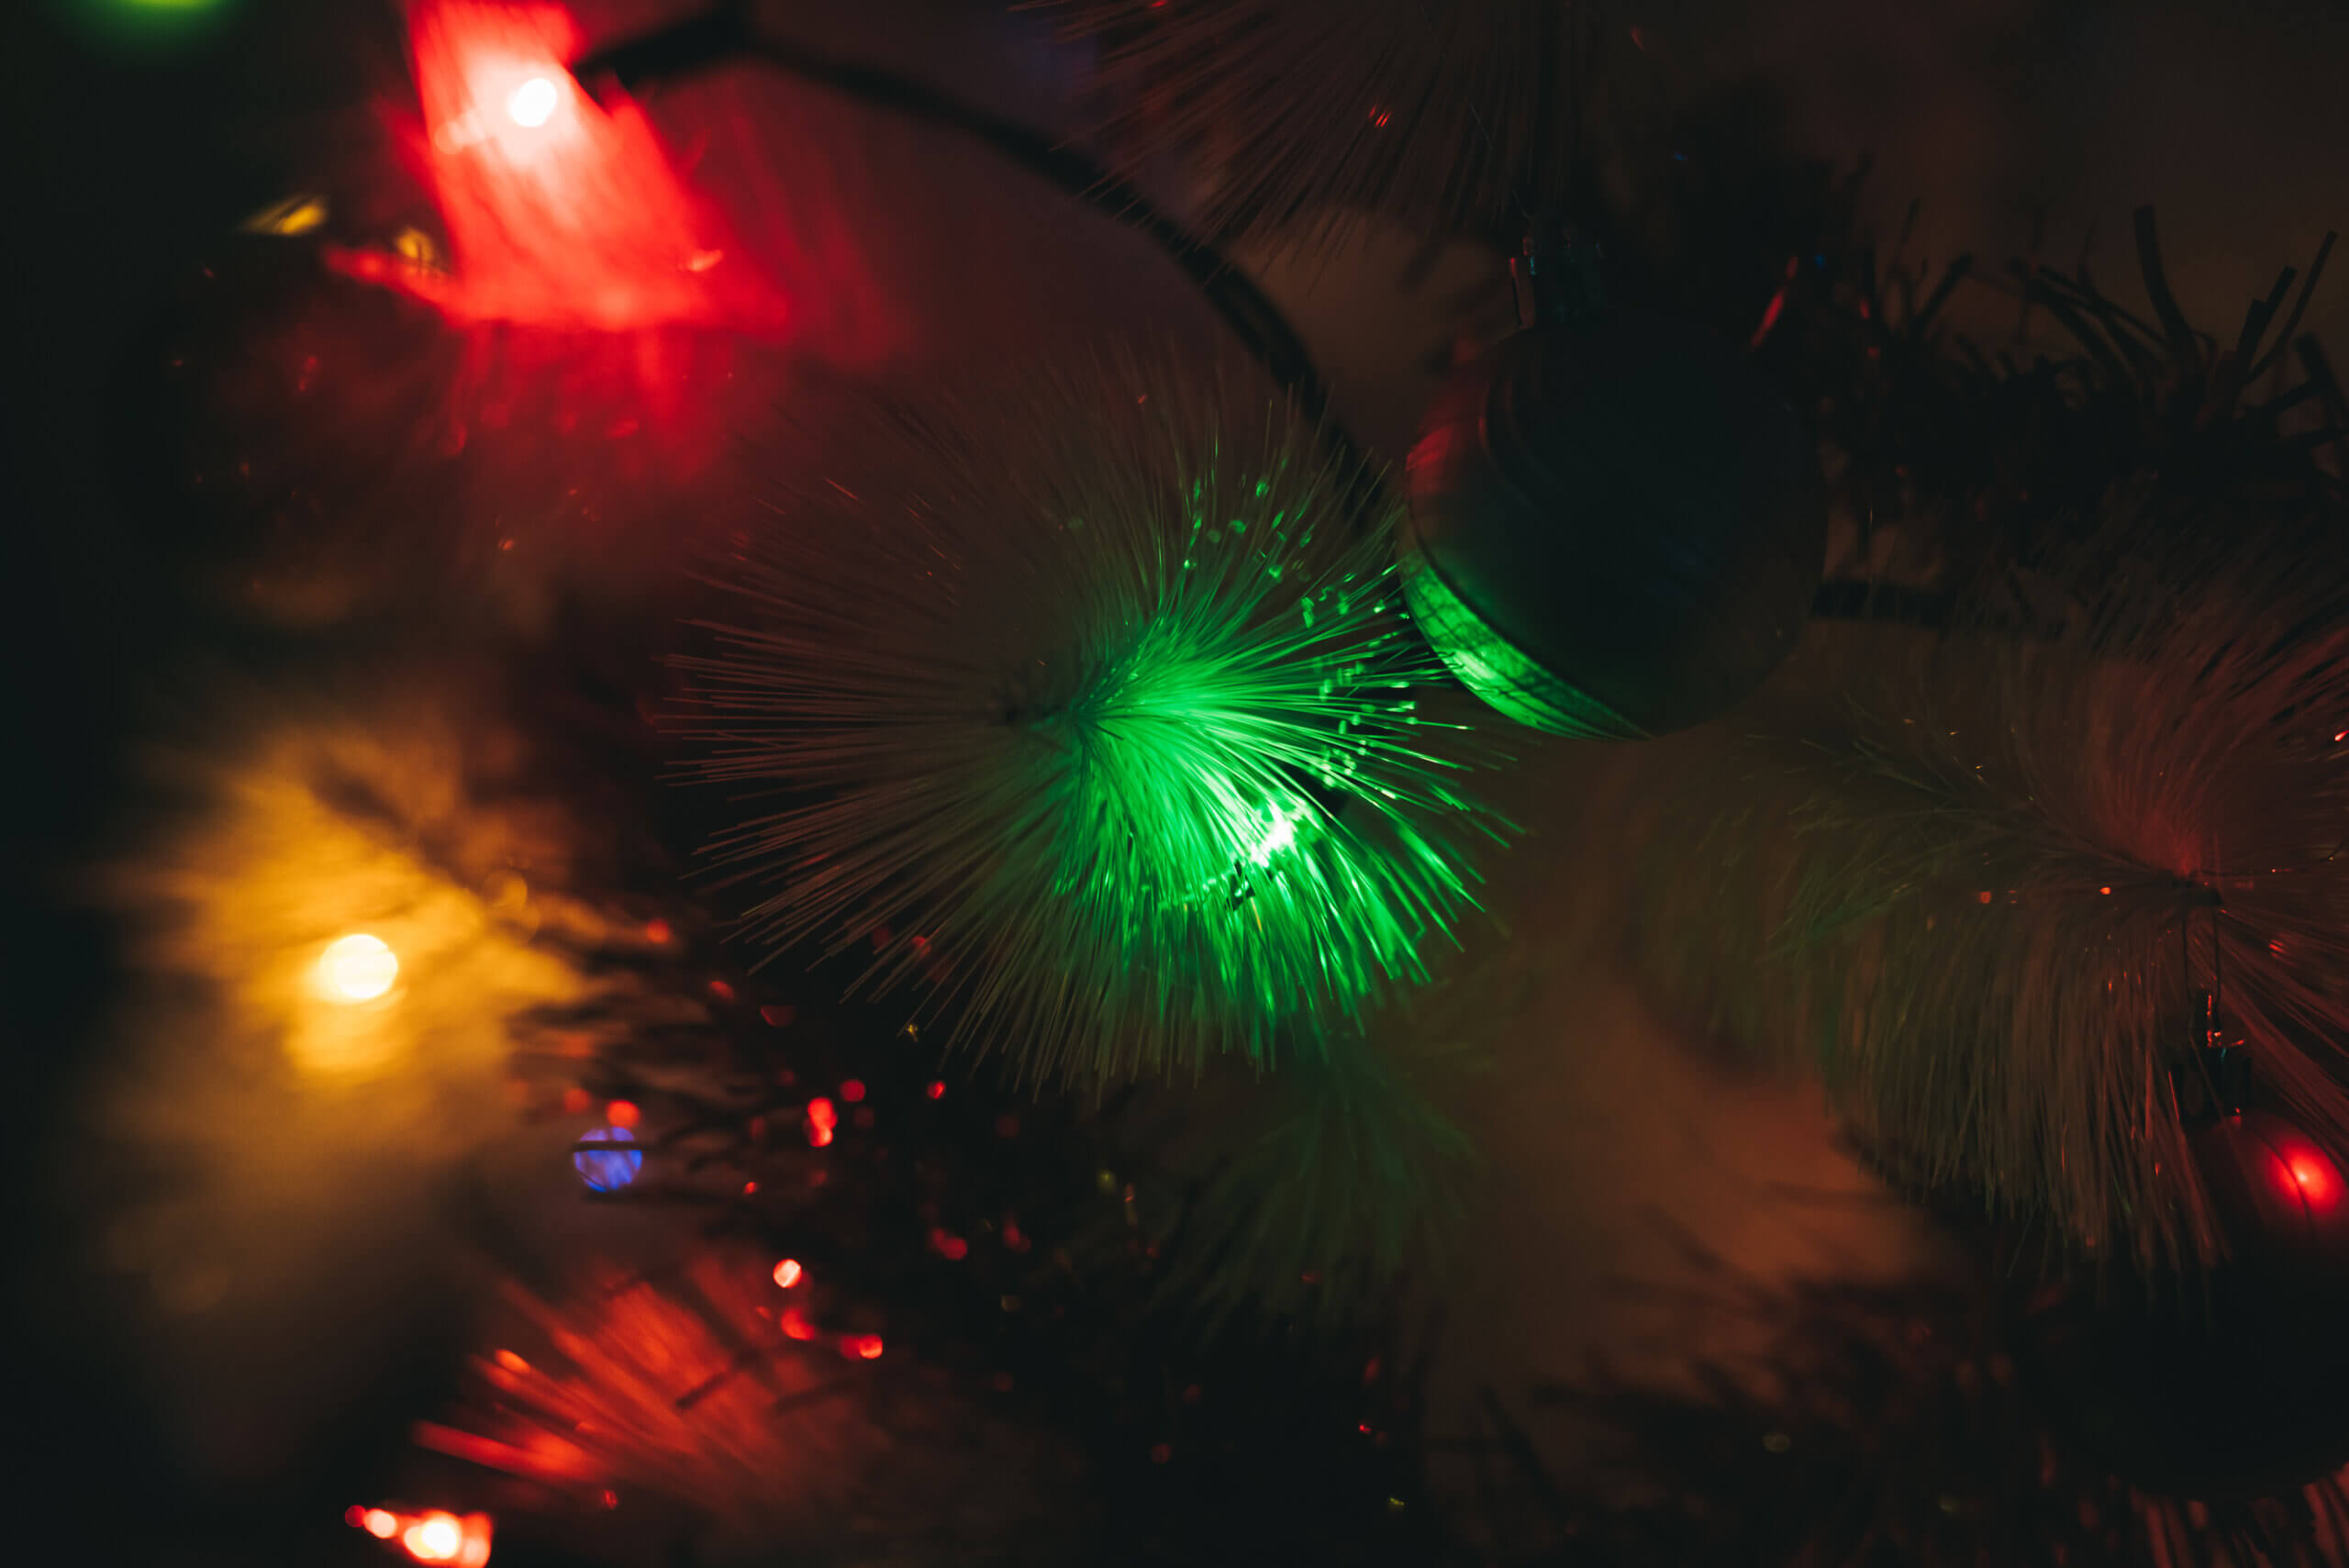 Close up on the christmas tree green light decoration - - christmas, holiday concept